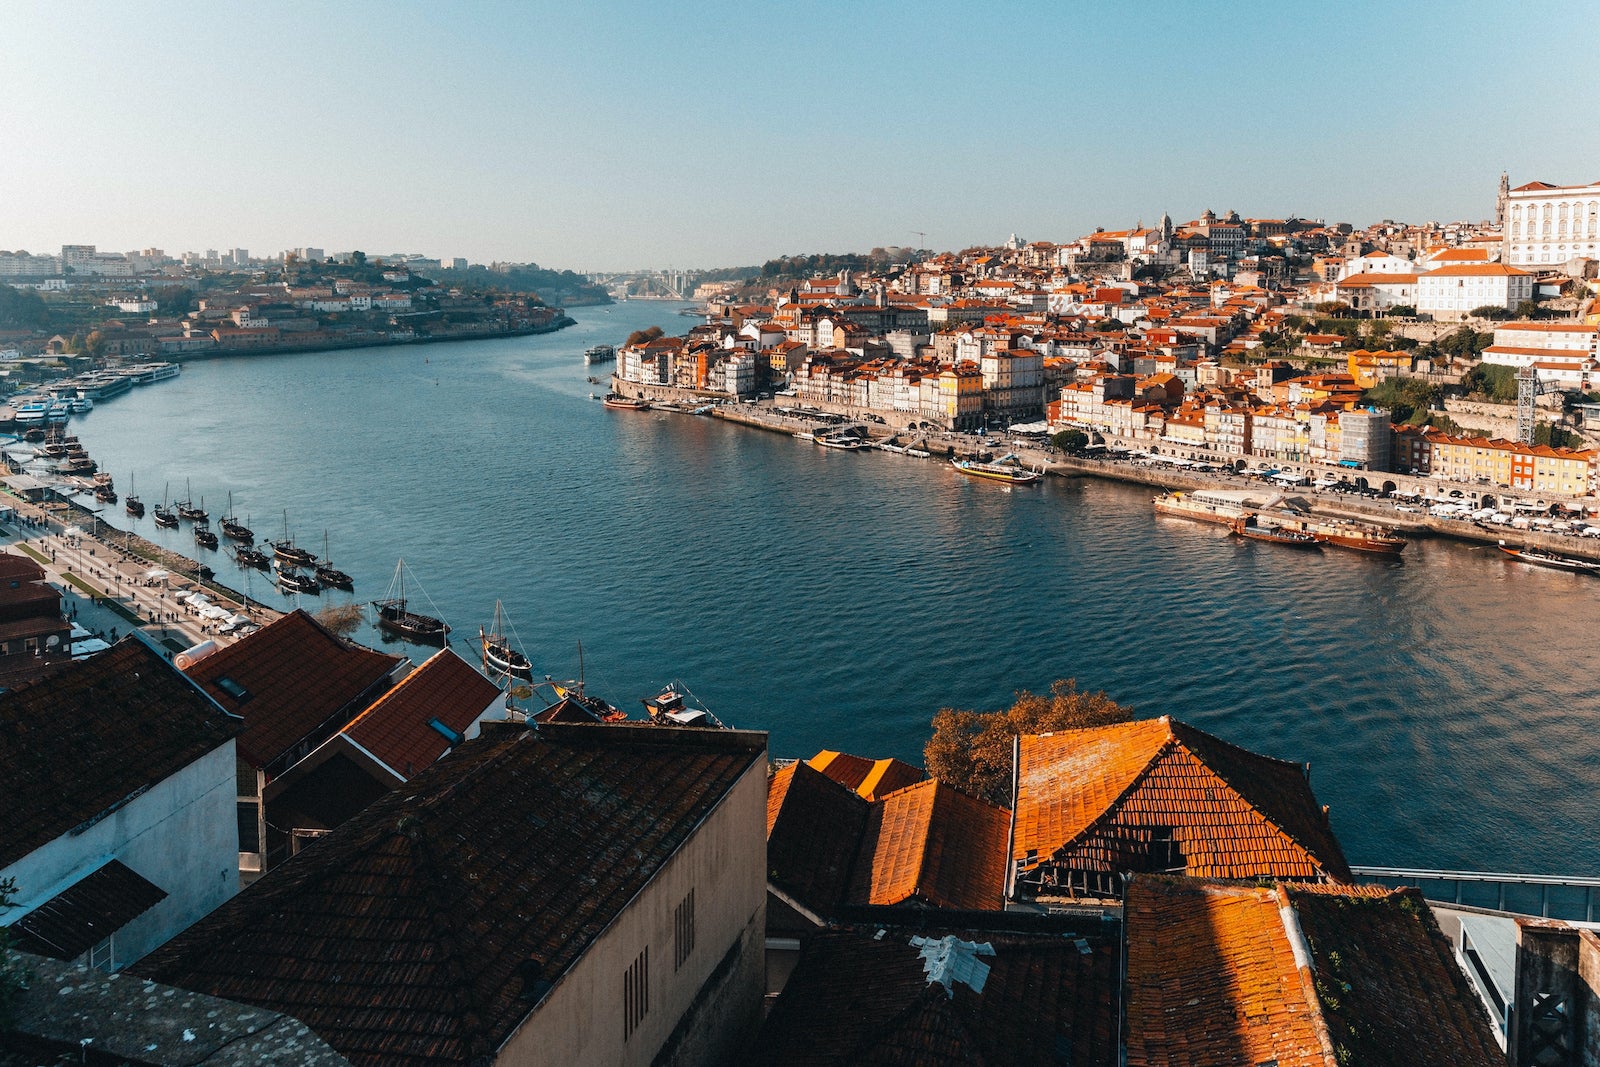 Porto old town cityscape and Douro river at sunny day